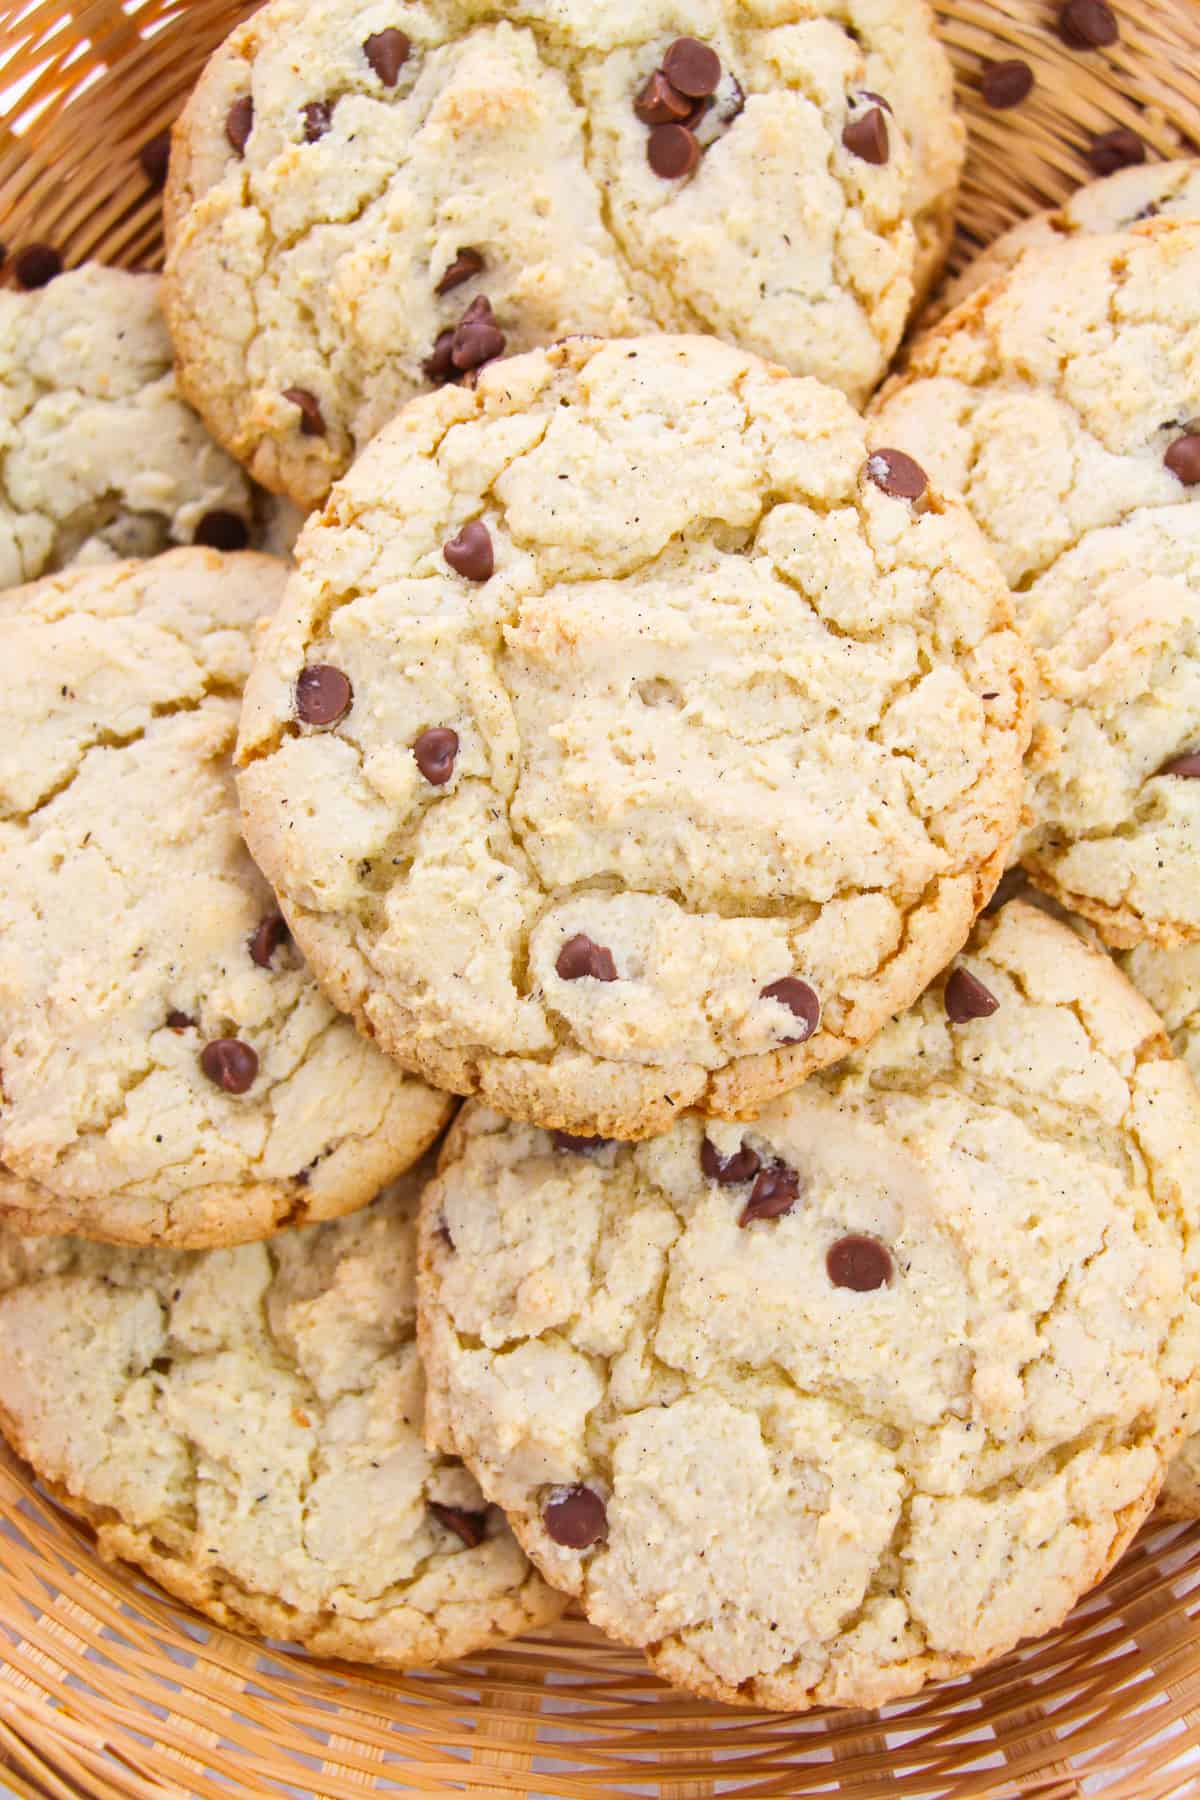 Top-down view of large Chocolate Chip Cake Mix Cookies in serving basket